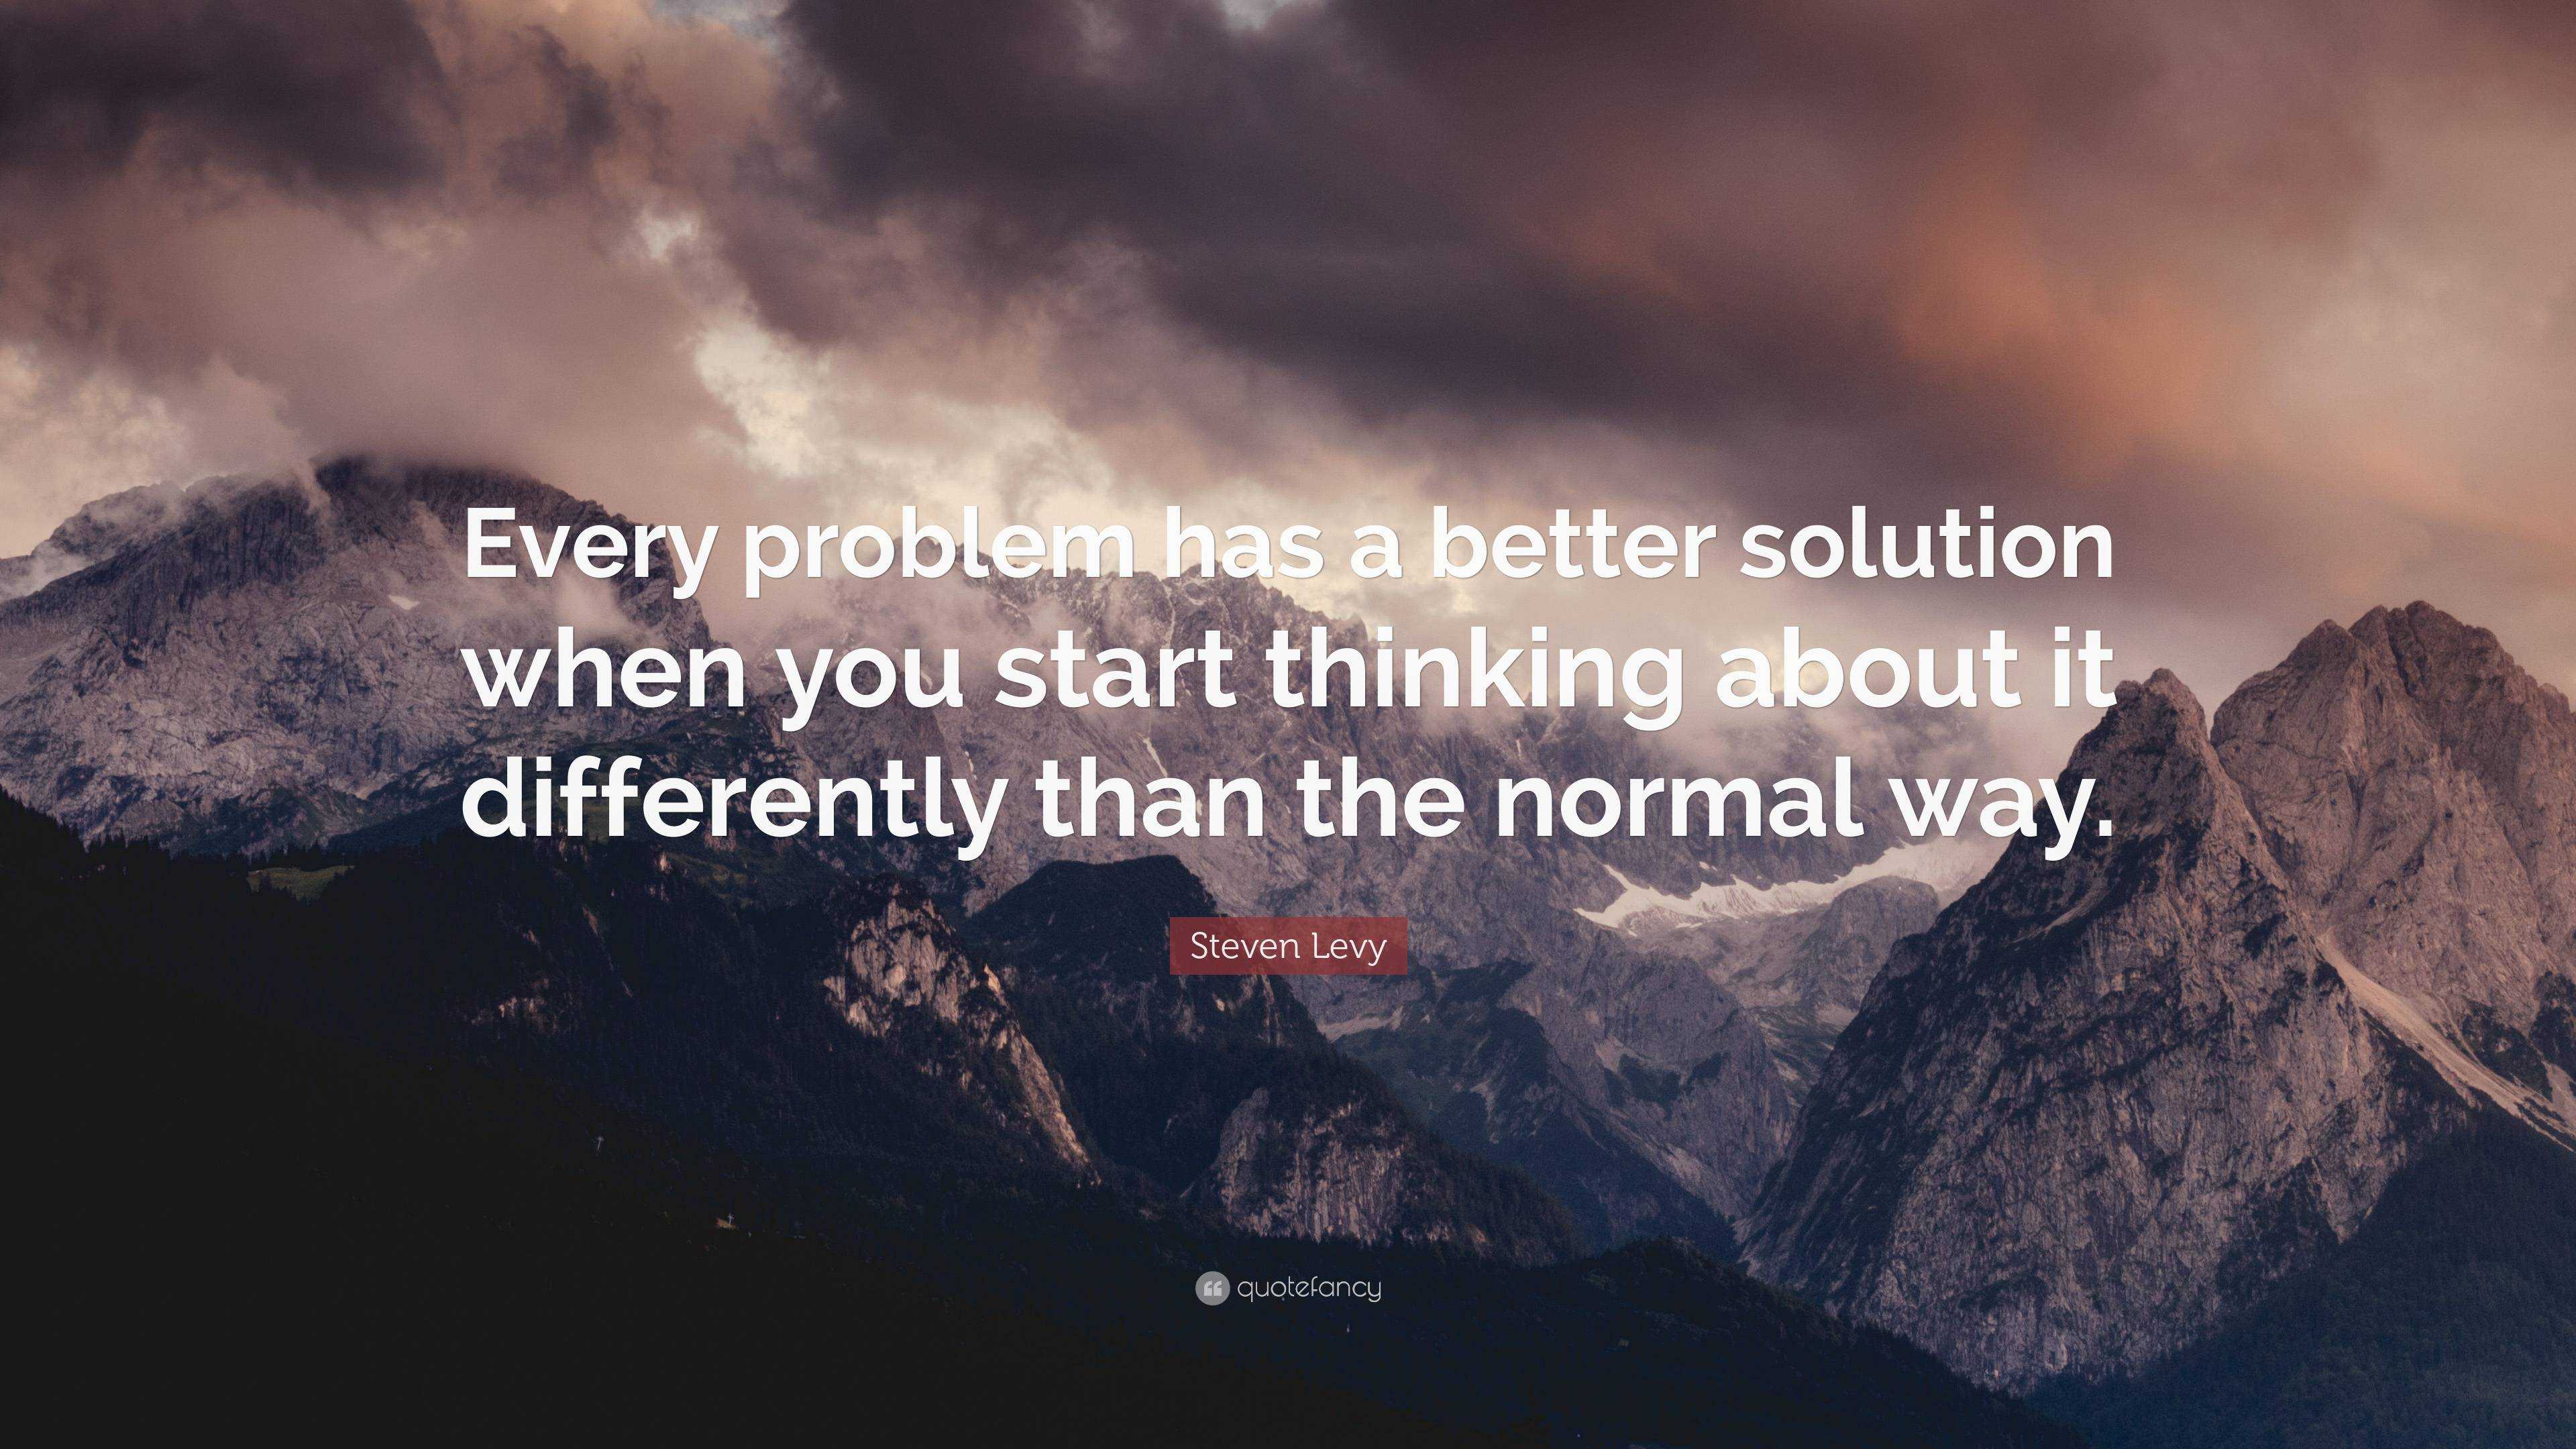 Steven Levy Quote: “Every problem has a better solution when you start ...